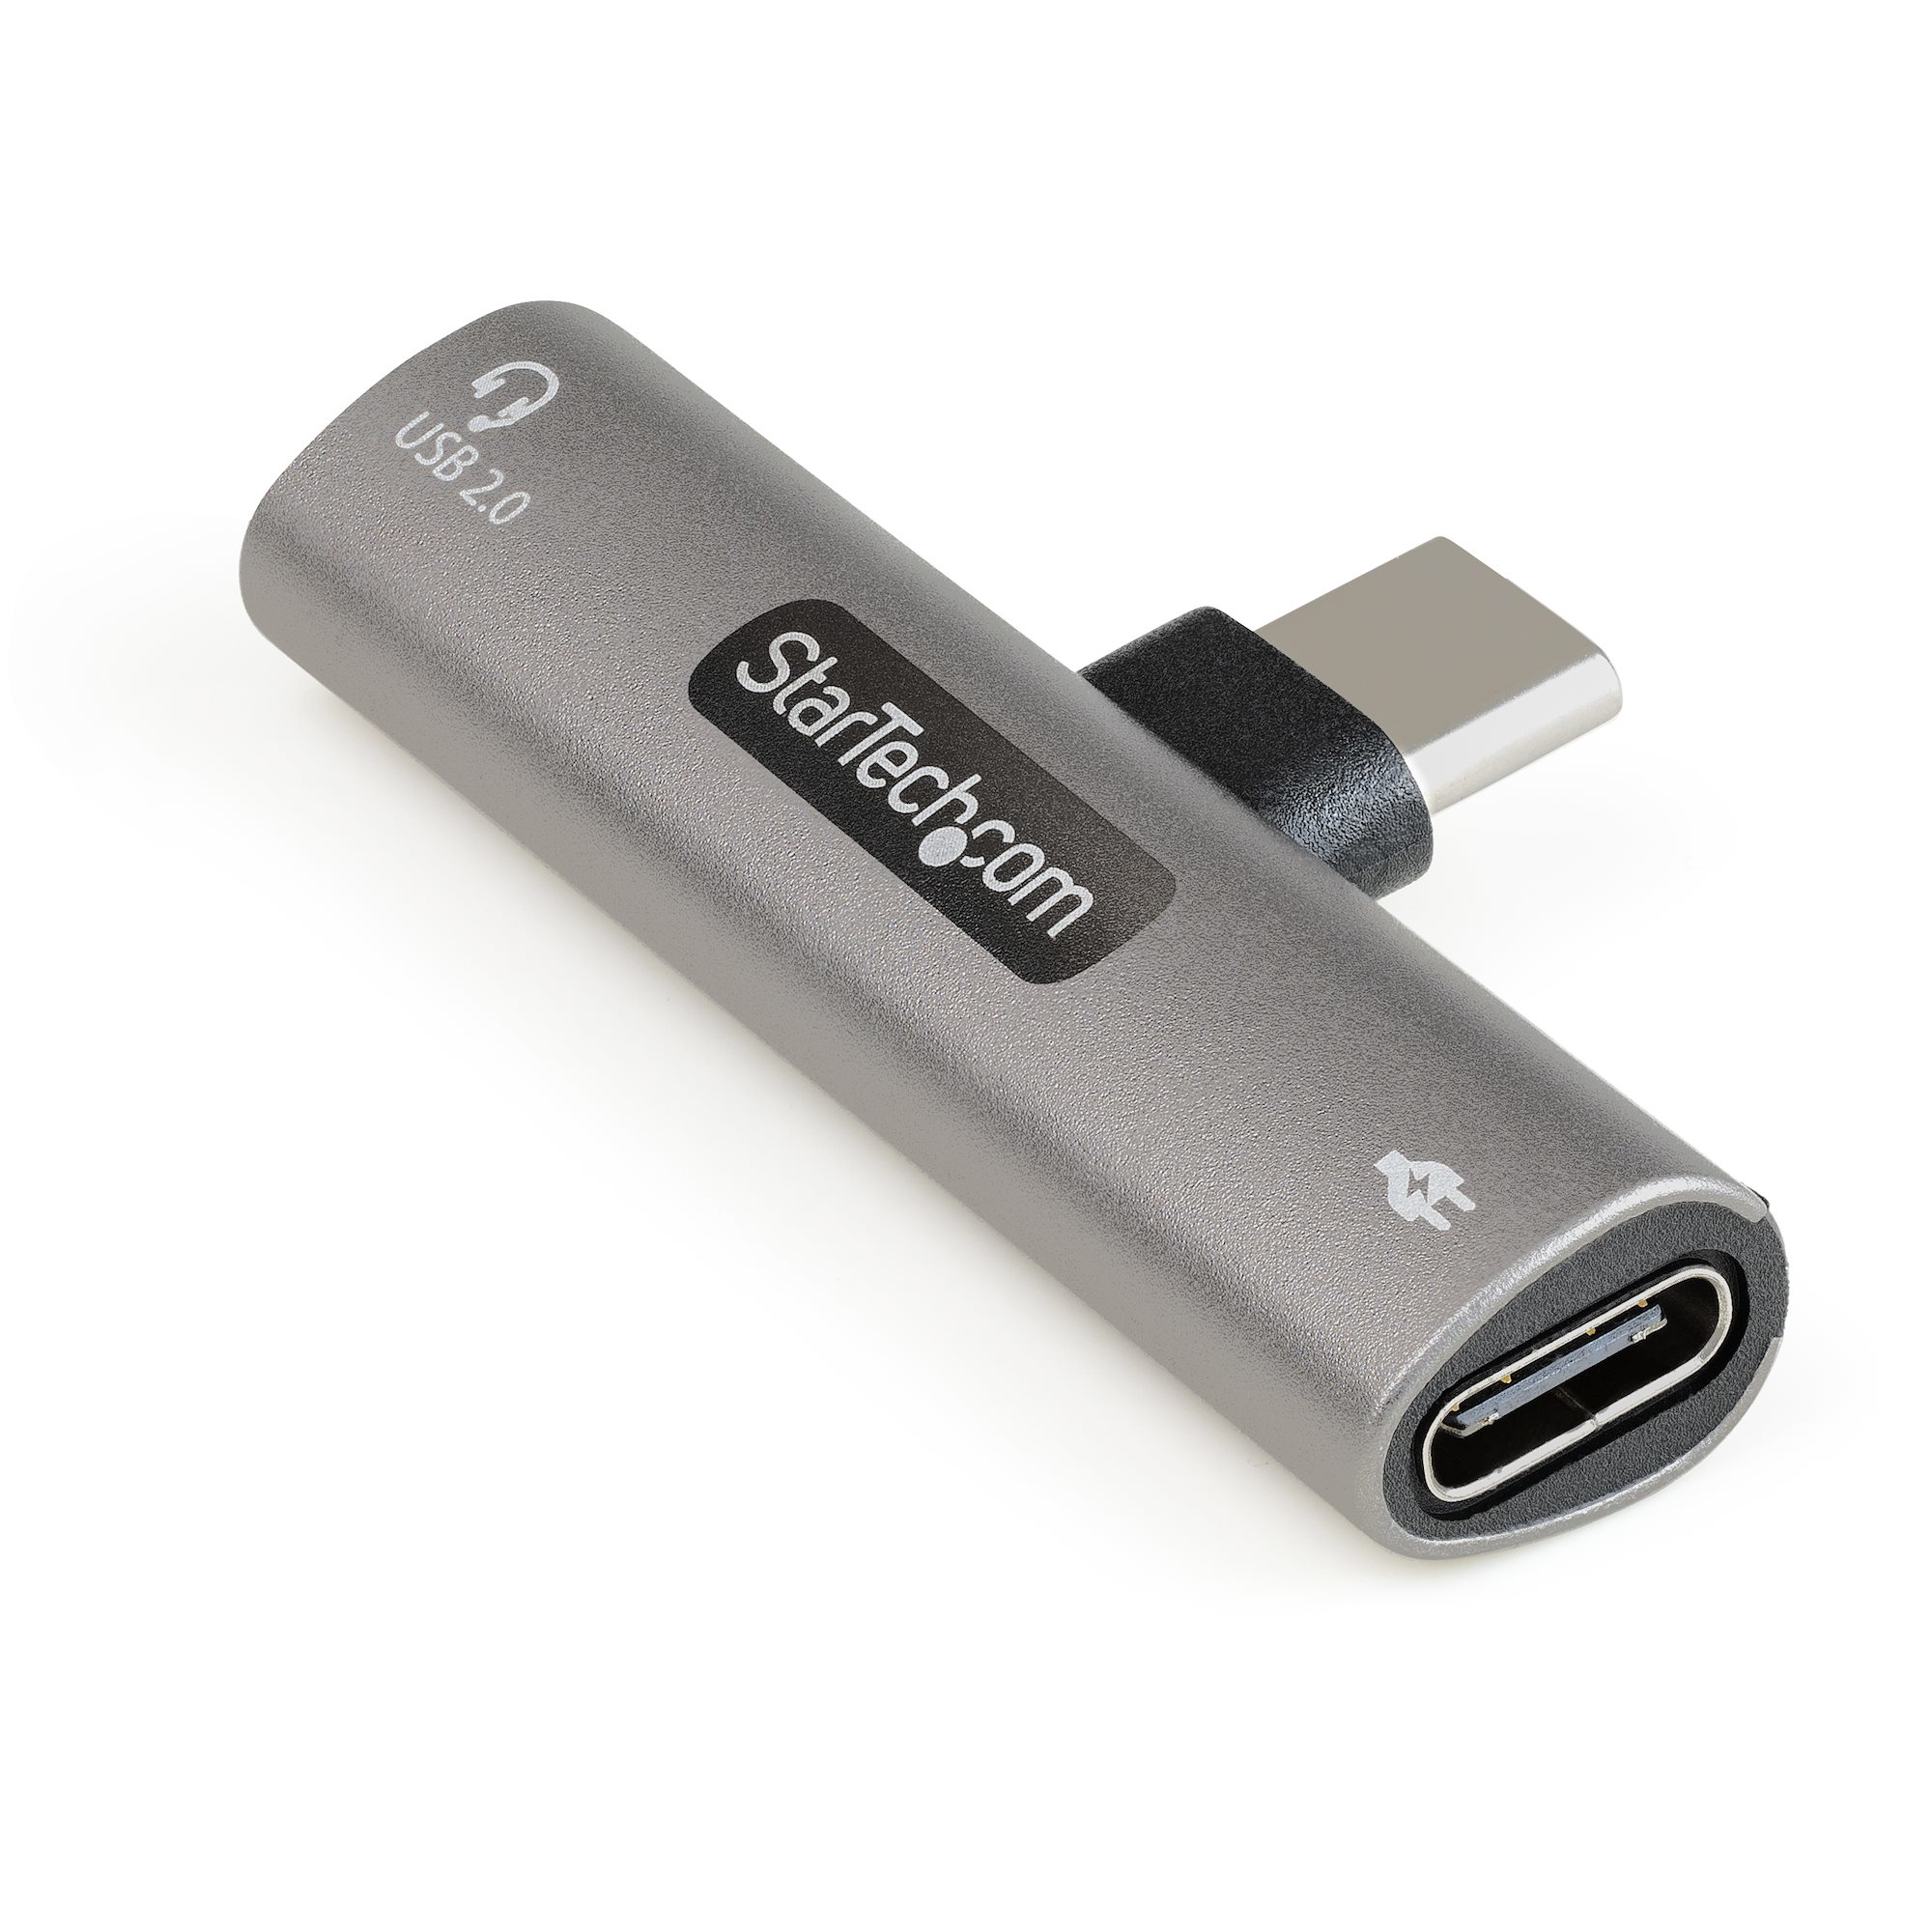 Photos - Other for Laptops Startech.com USB C Audio & Charge Adapter - USB-C Audio Adapter w/ CDP 